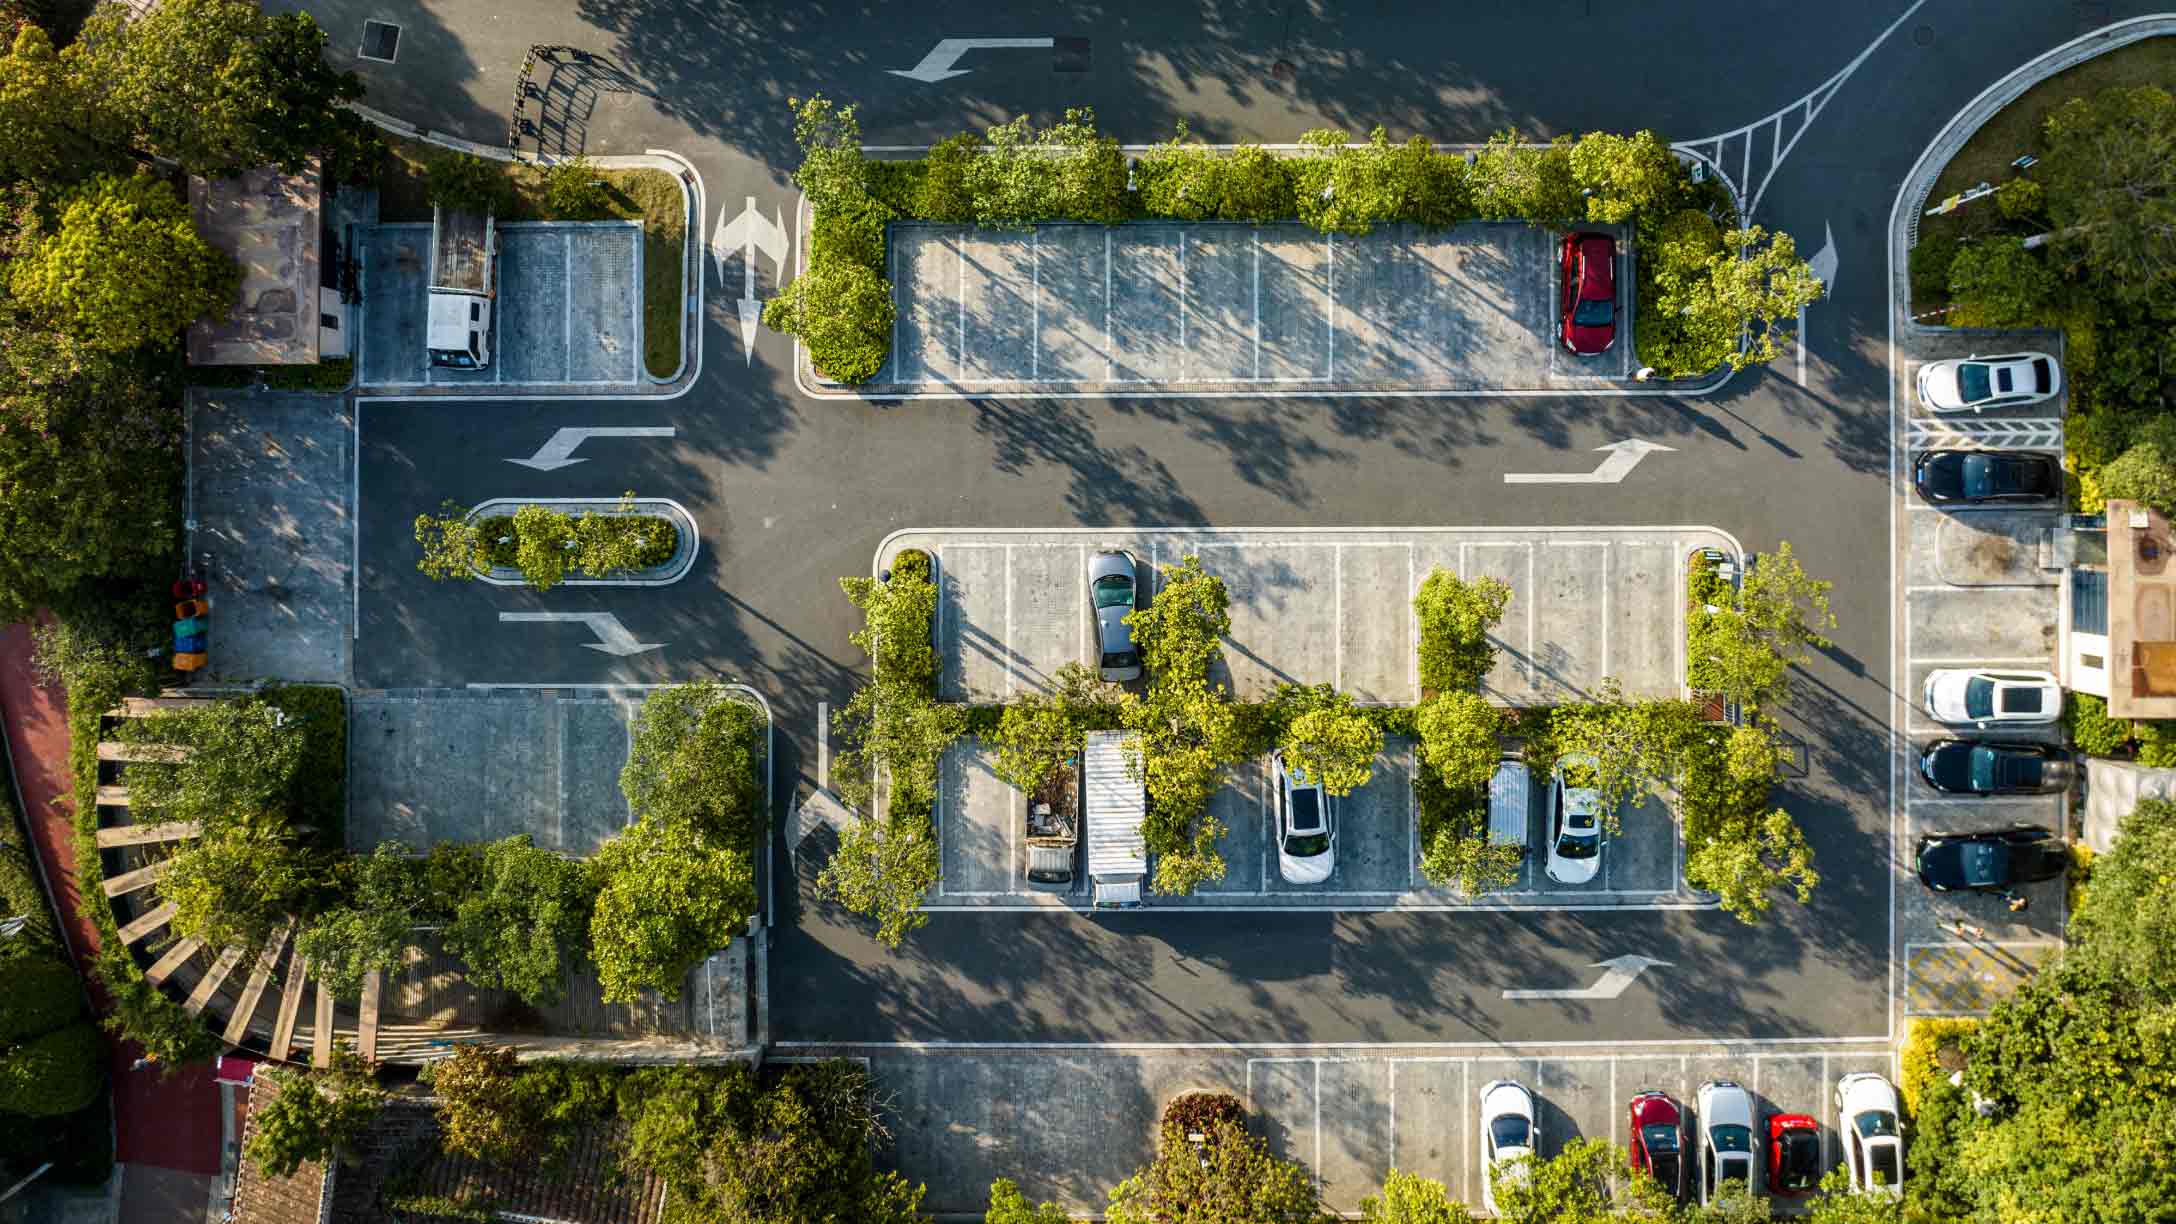 overhead view of a parking lot with bushes around the spaces